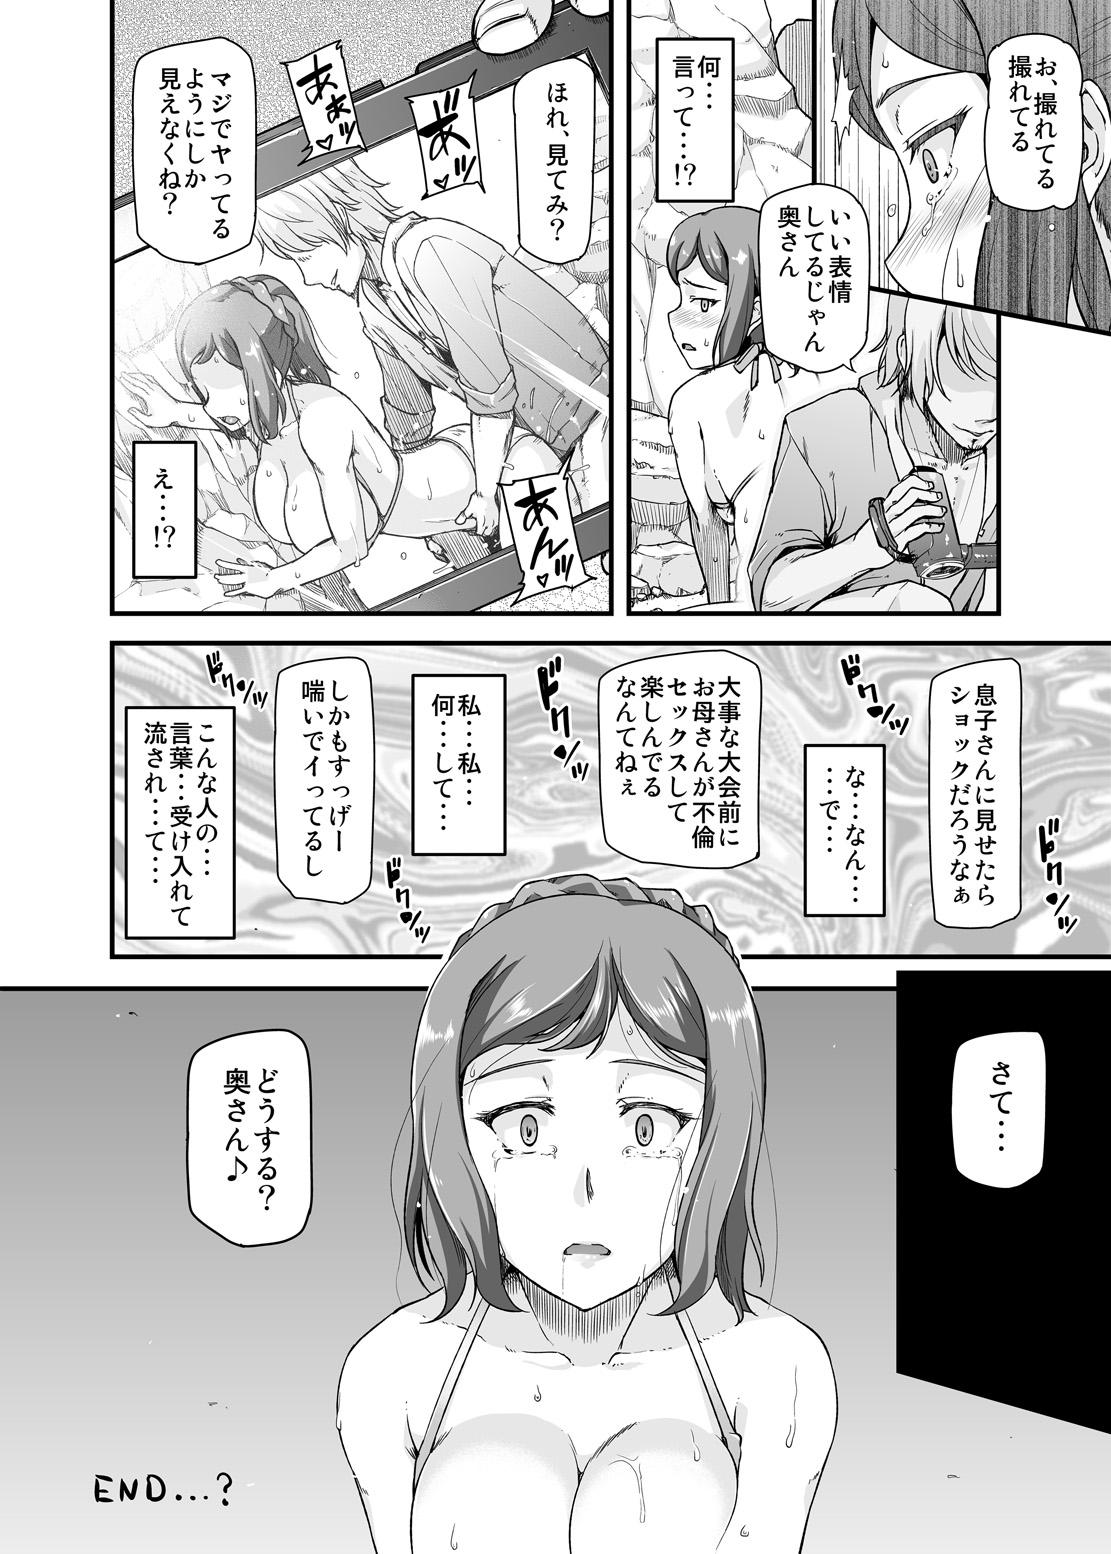 Game Otosare Rinko - Gundam build fighters Jacking Off - Page 11